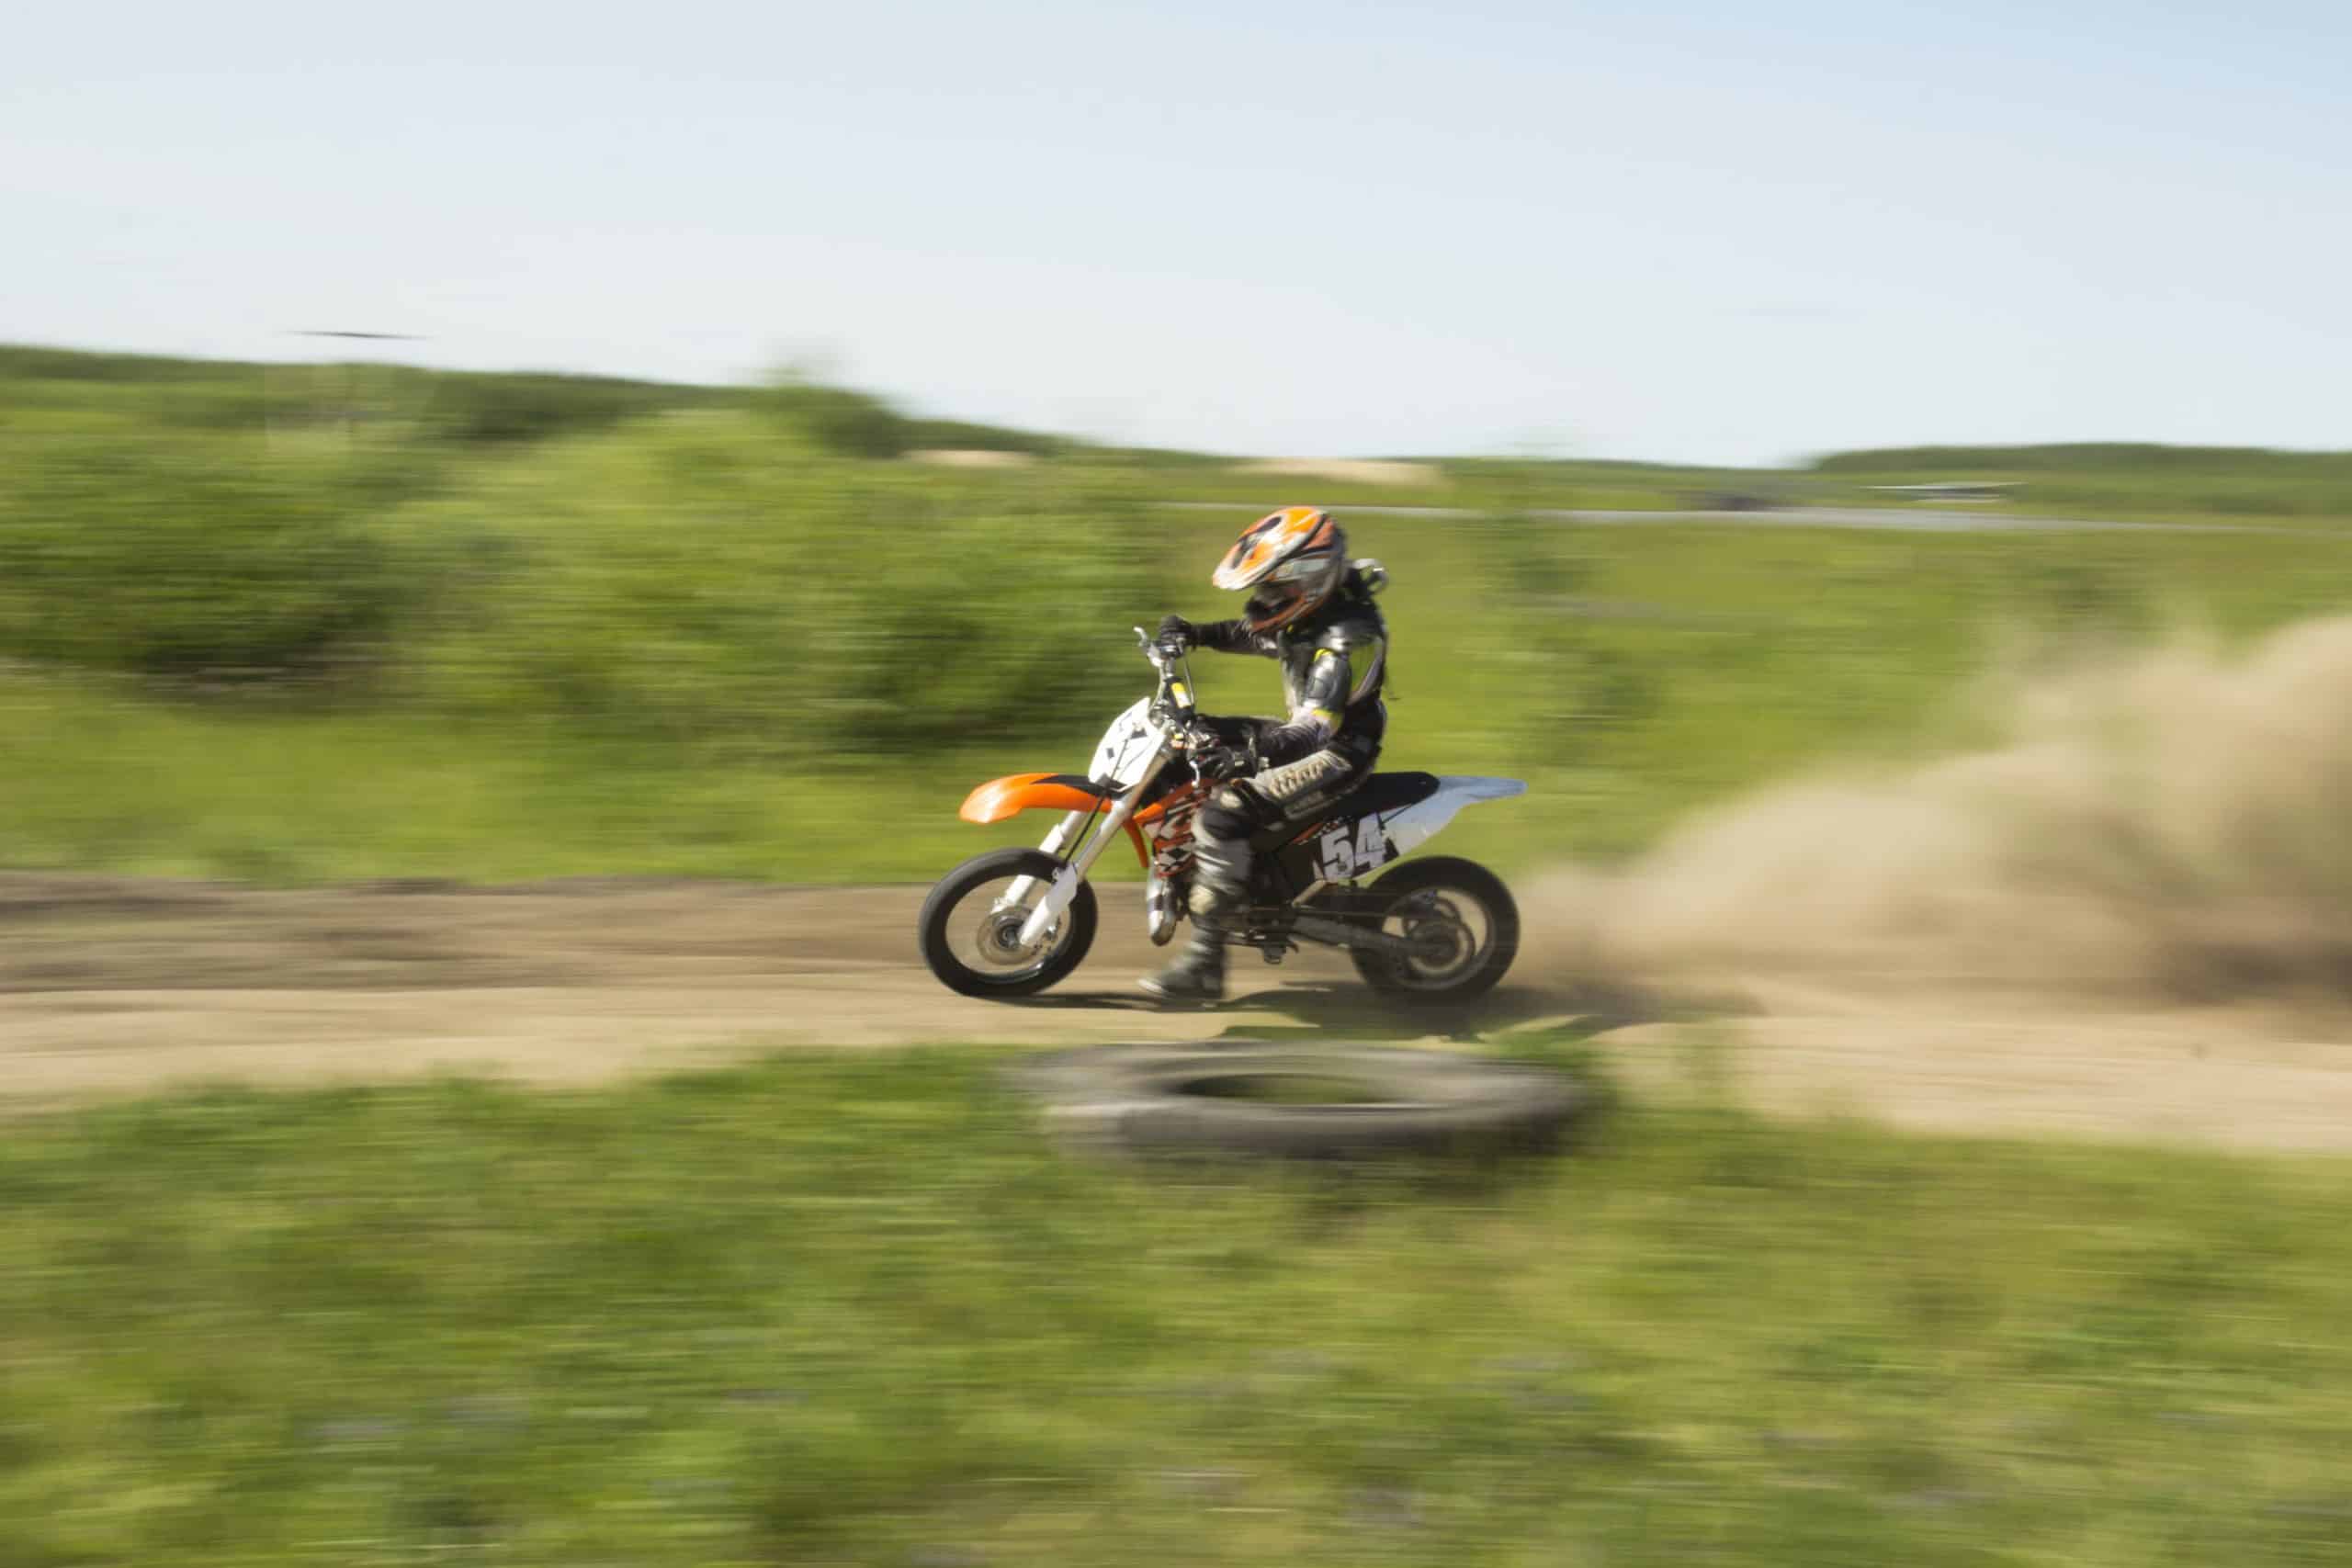 How Fast Is A 125cc Dirt Bike? – Detailed Guide